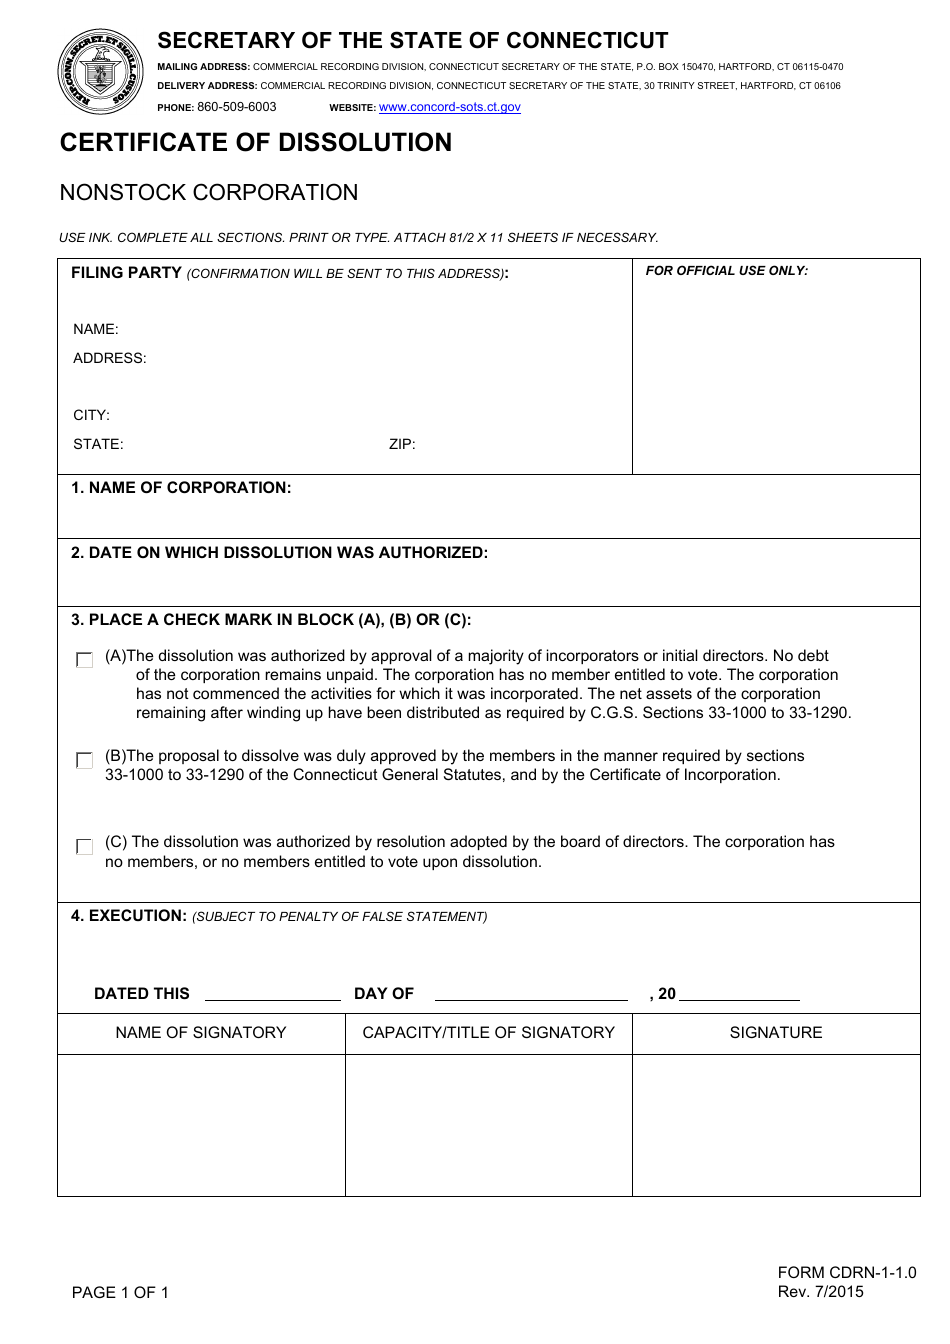 Form CDRN-1-1.0 Certificate of Dissolution - Nonstock Corporation - Connecticut, Page 1